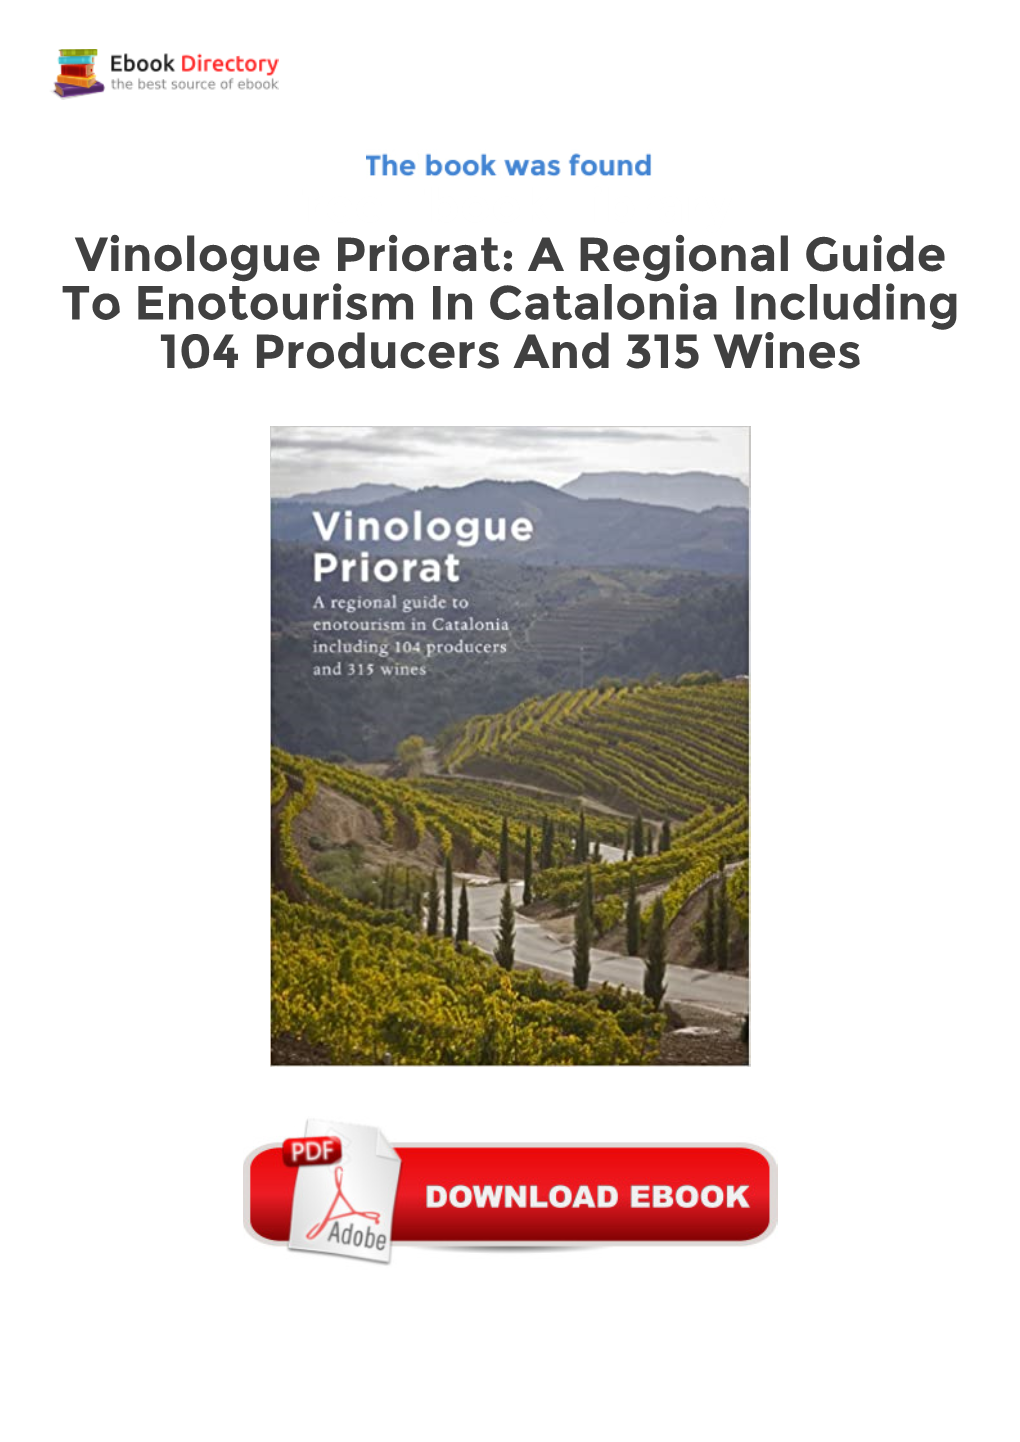 Free Ebook Library Vinologue Priorat: a Regional Guide To